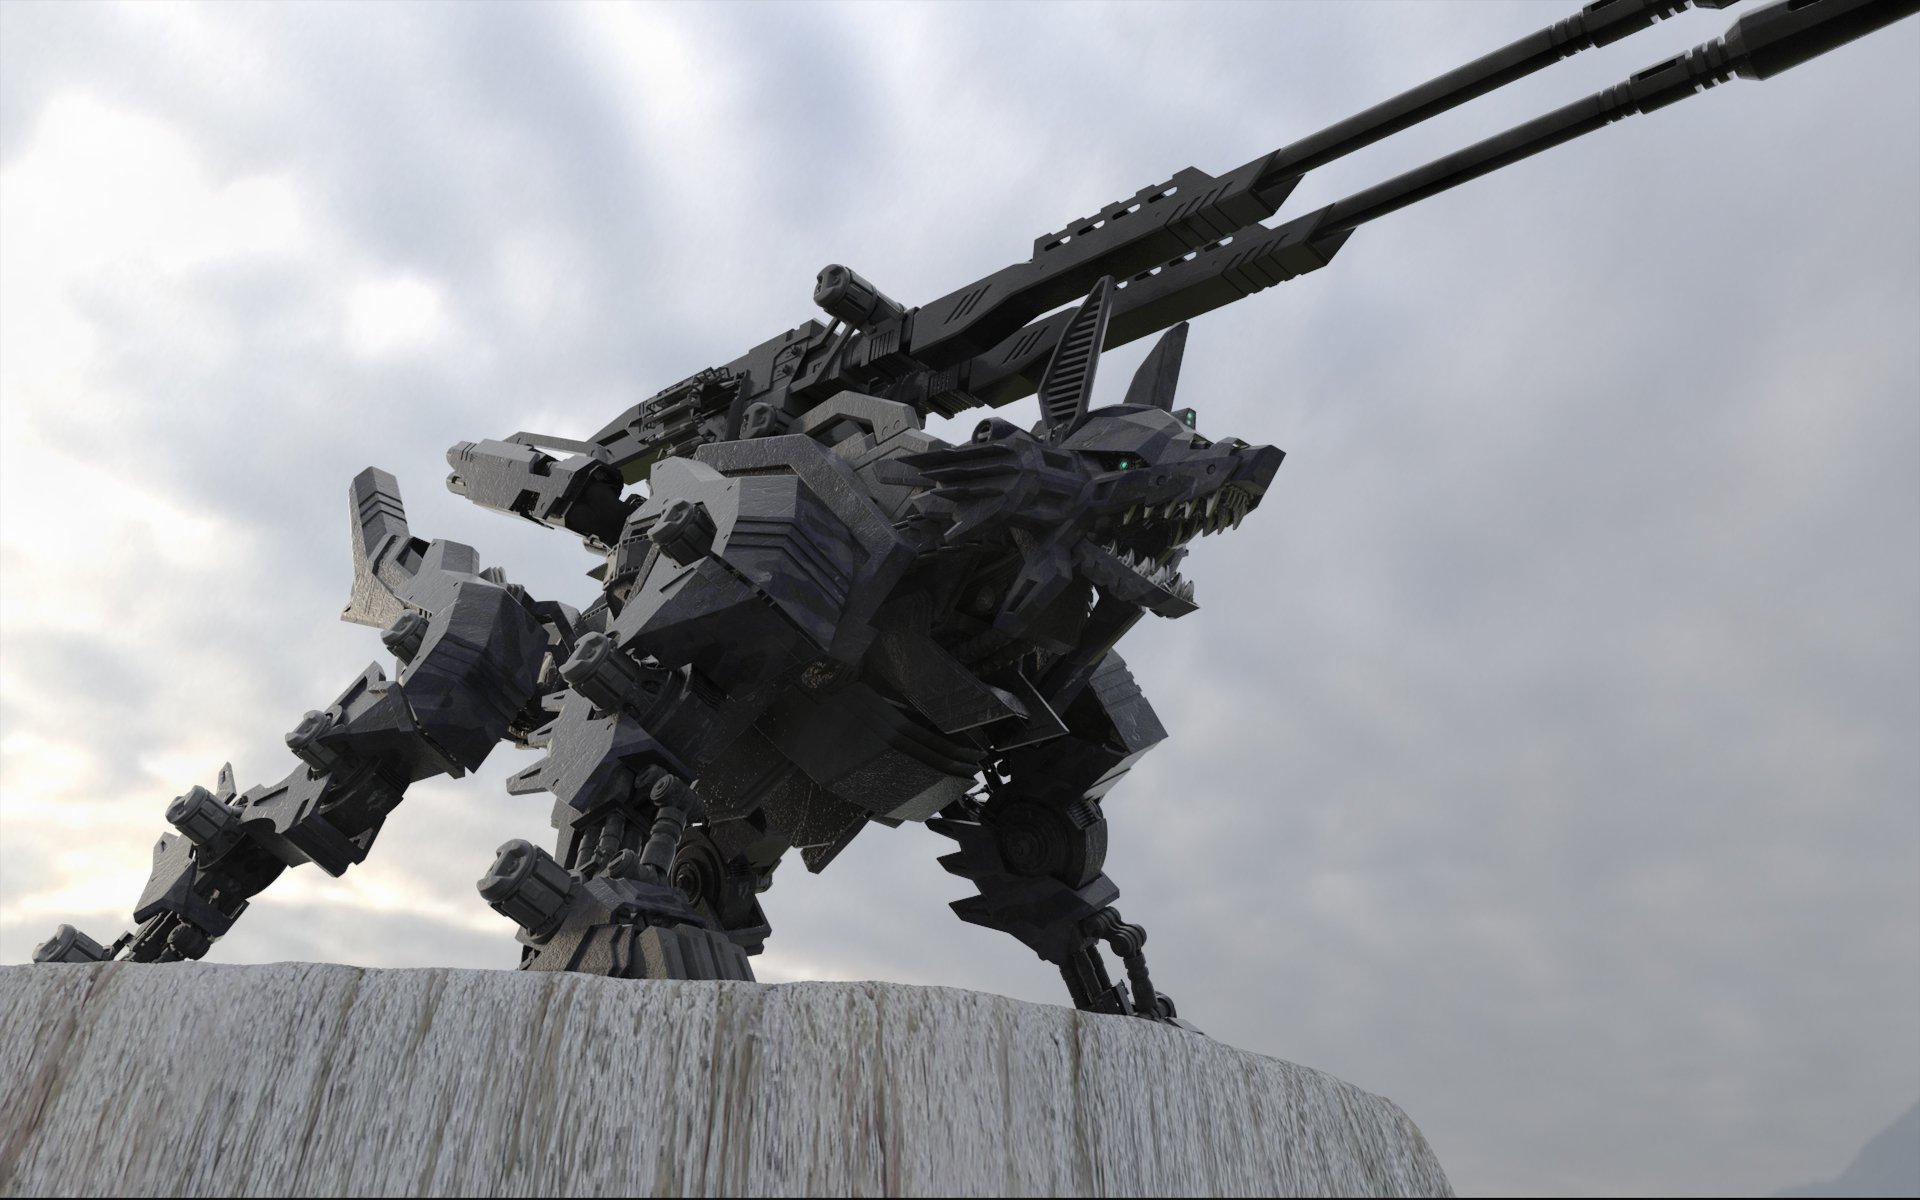 Zoids Full HD Wallpaper and Background Image | 1920x1200 | ID:118125